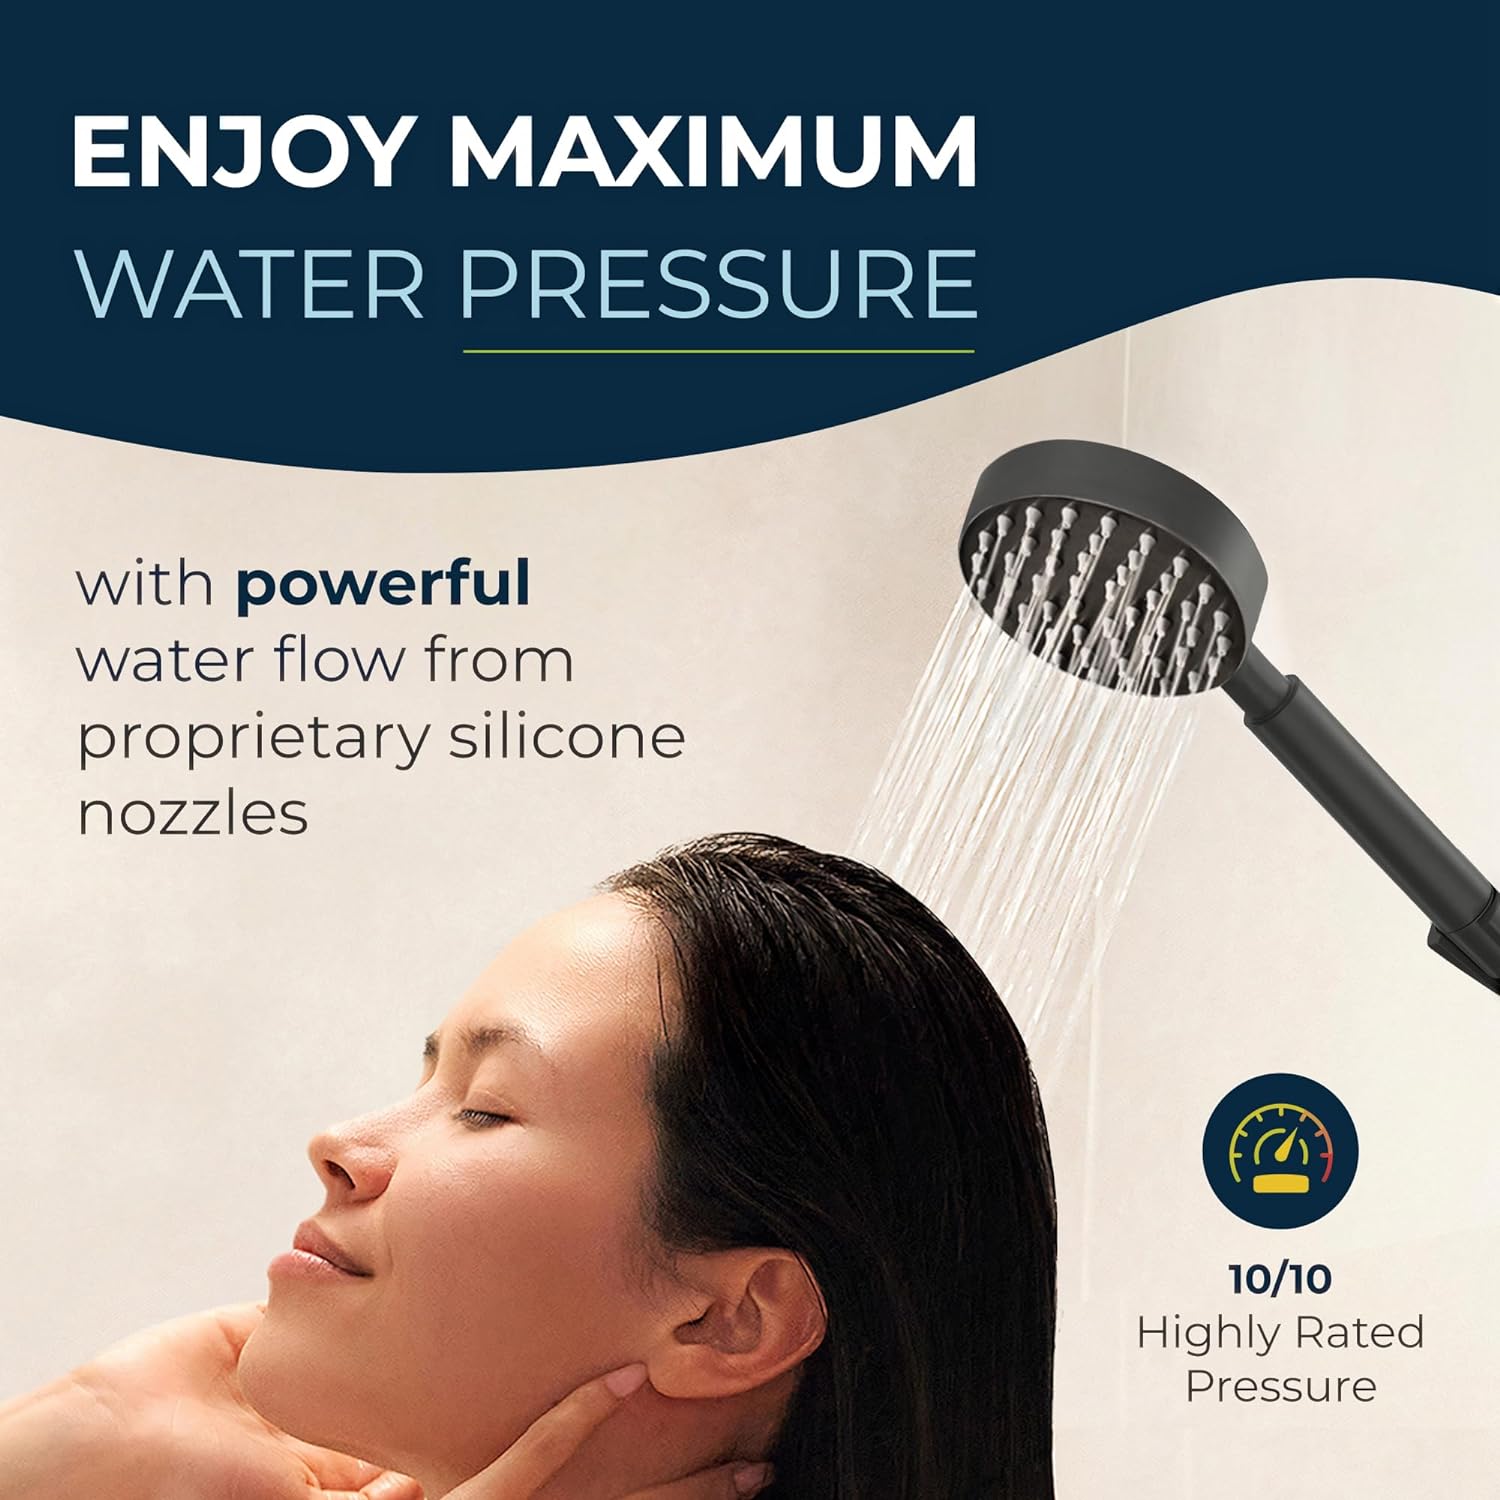 ALL METAL Handheld Shower Head with Hose and Brass Holder- CHROME - 2.5 GPM High Pressure Shower Heads - Hand Shower Head with Adjustable Shower Wand Bracket - 6ft Flexible Extension